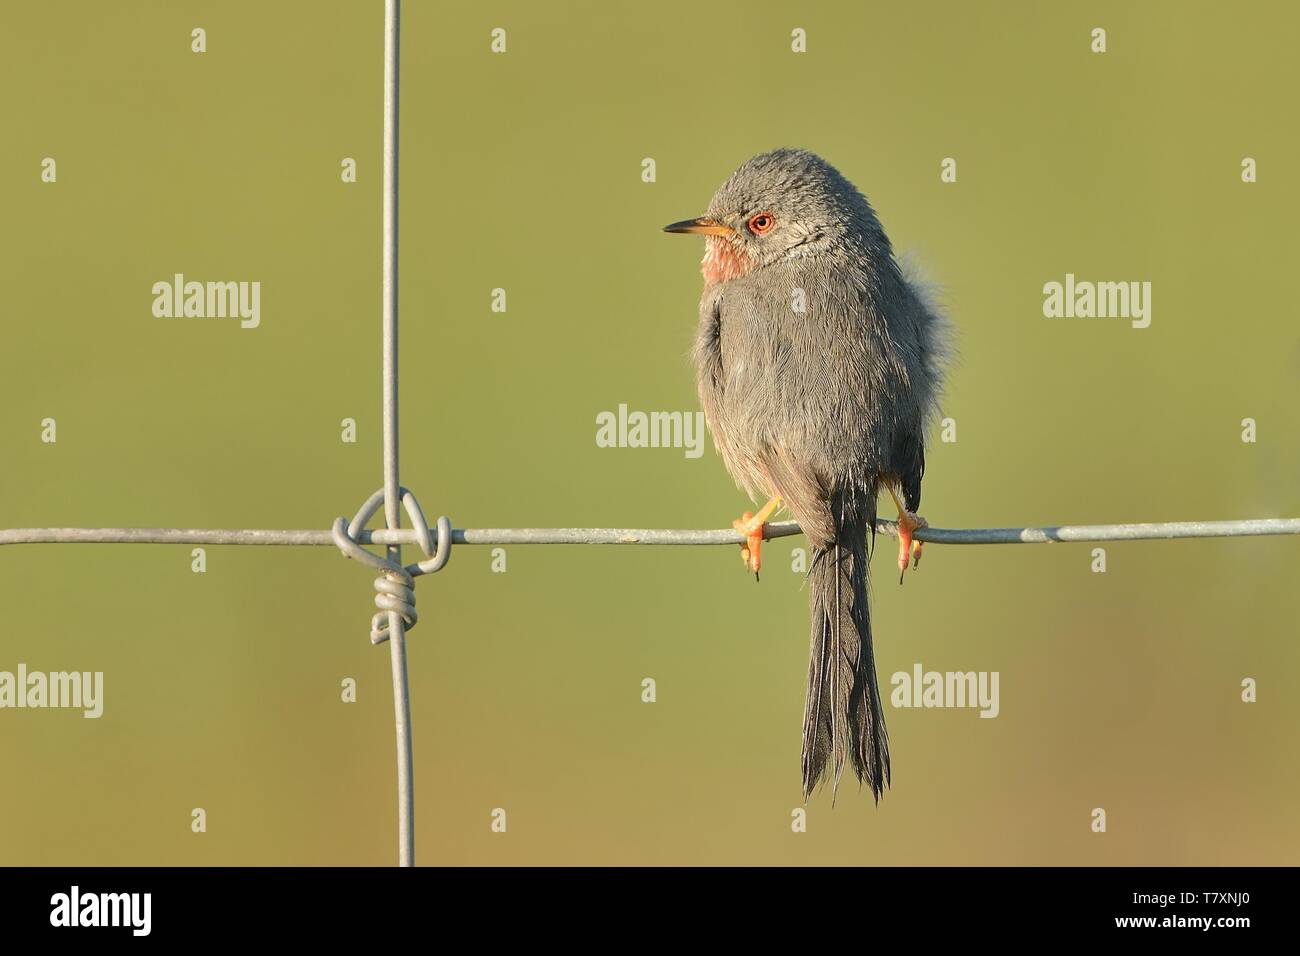 Dartford Warbler (Sylvia undata) perched on a wire with blurred background. Spain, France, Greece, Stock Photo